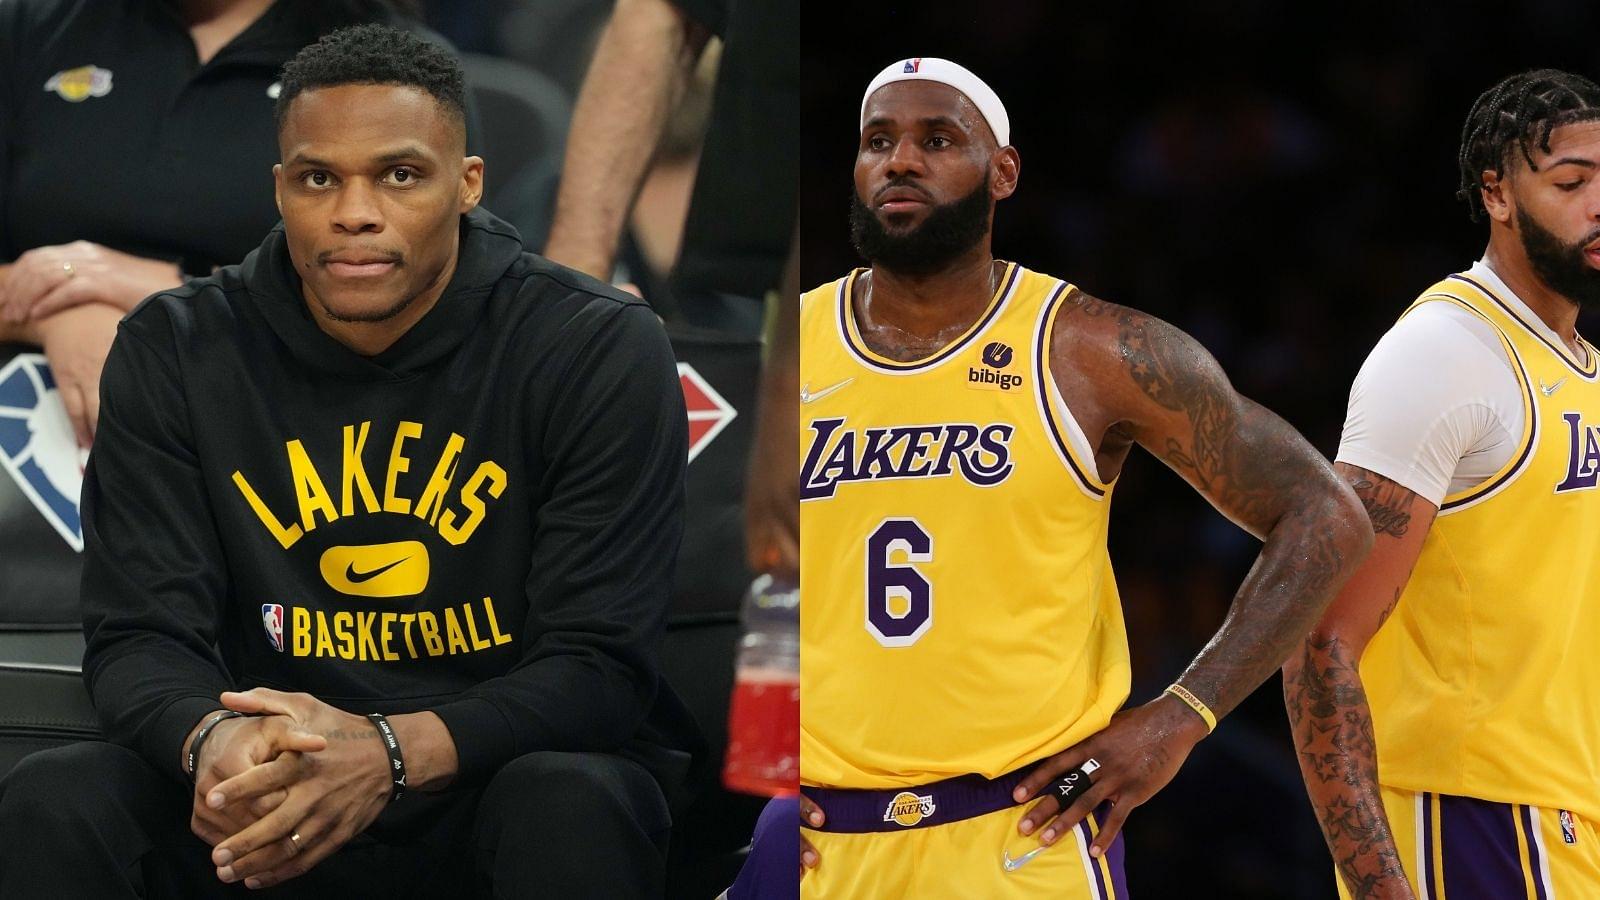 "Russell Westbrook likes a fan's comment asking him to leave Lakers": Brodie's Instagram activity suggests even he wants to leave LeBron James and Co alone